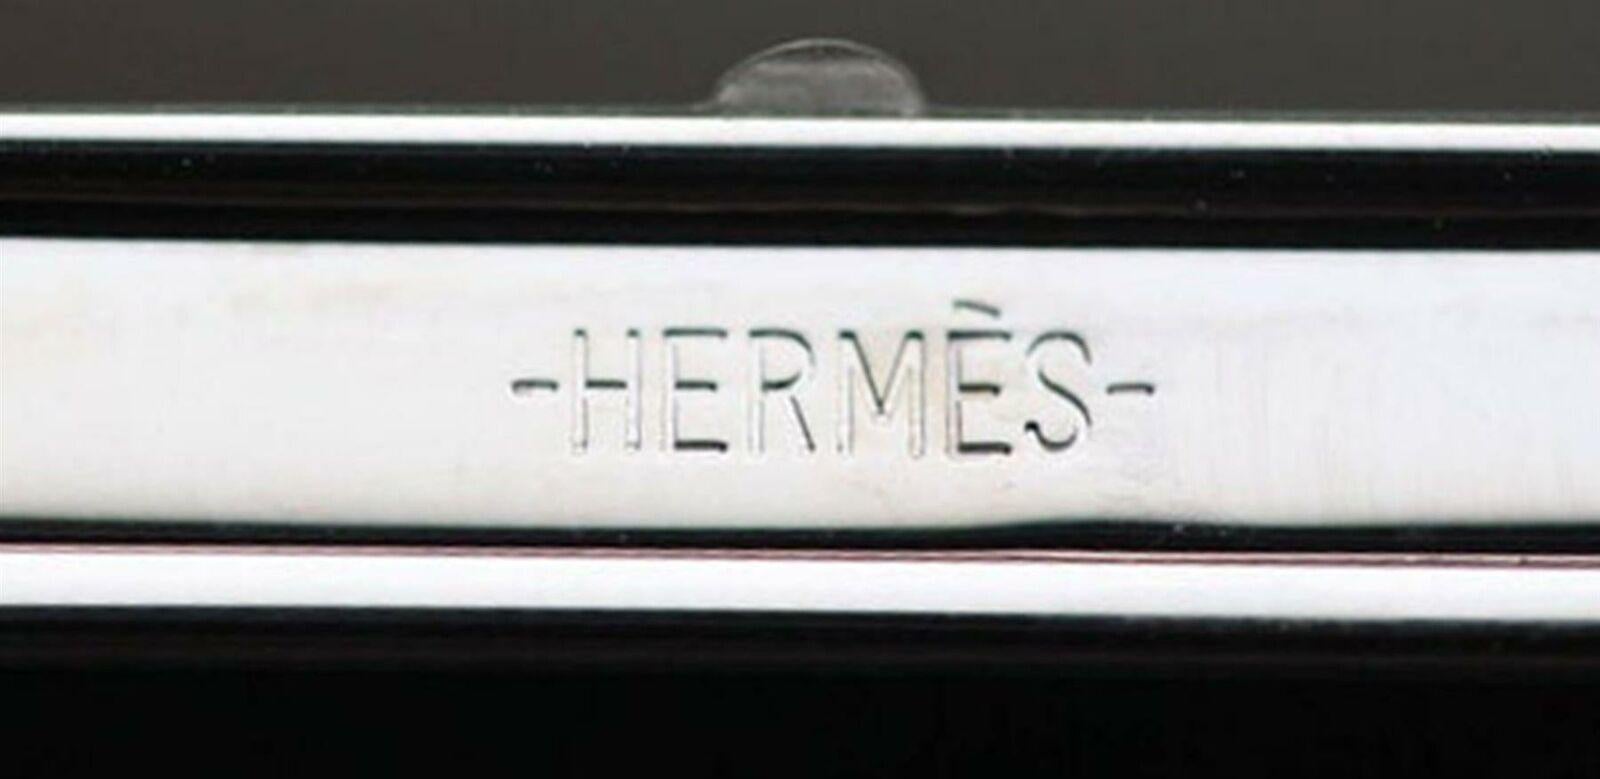 hermes constance to go